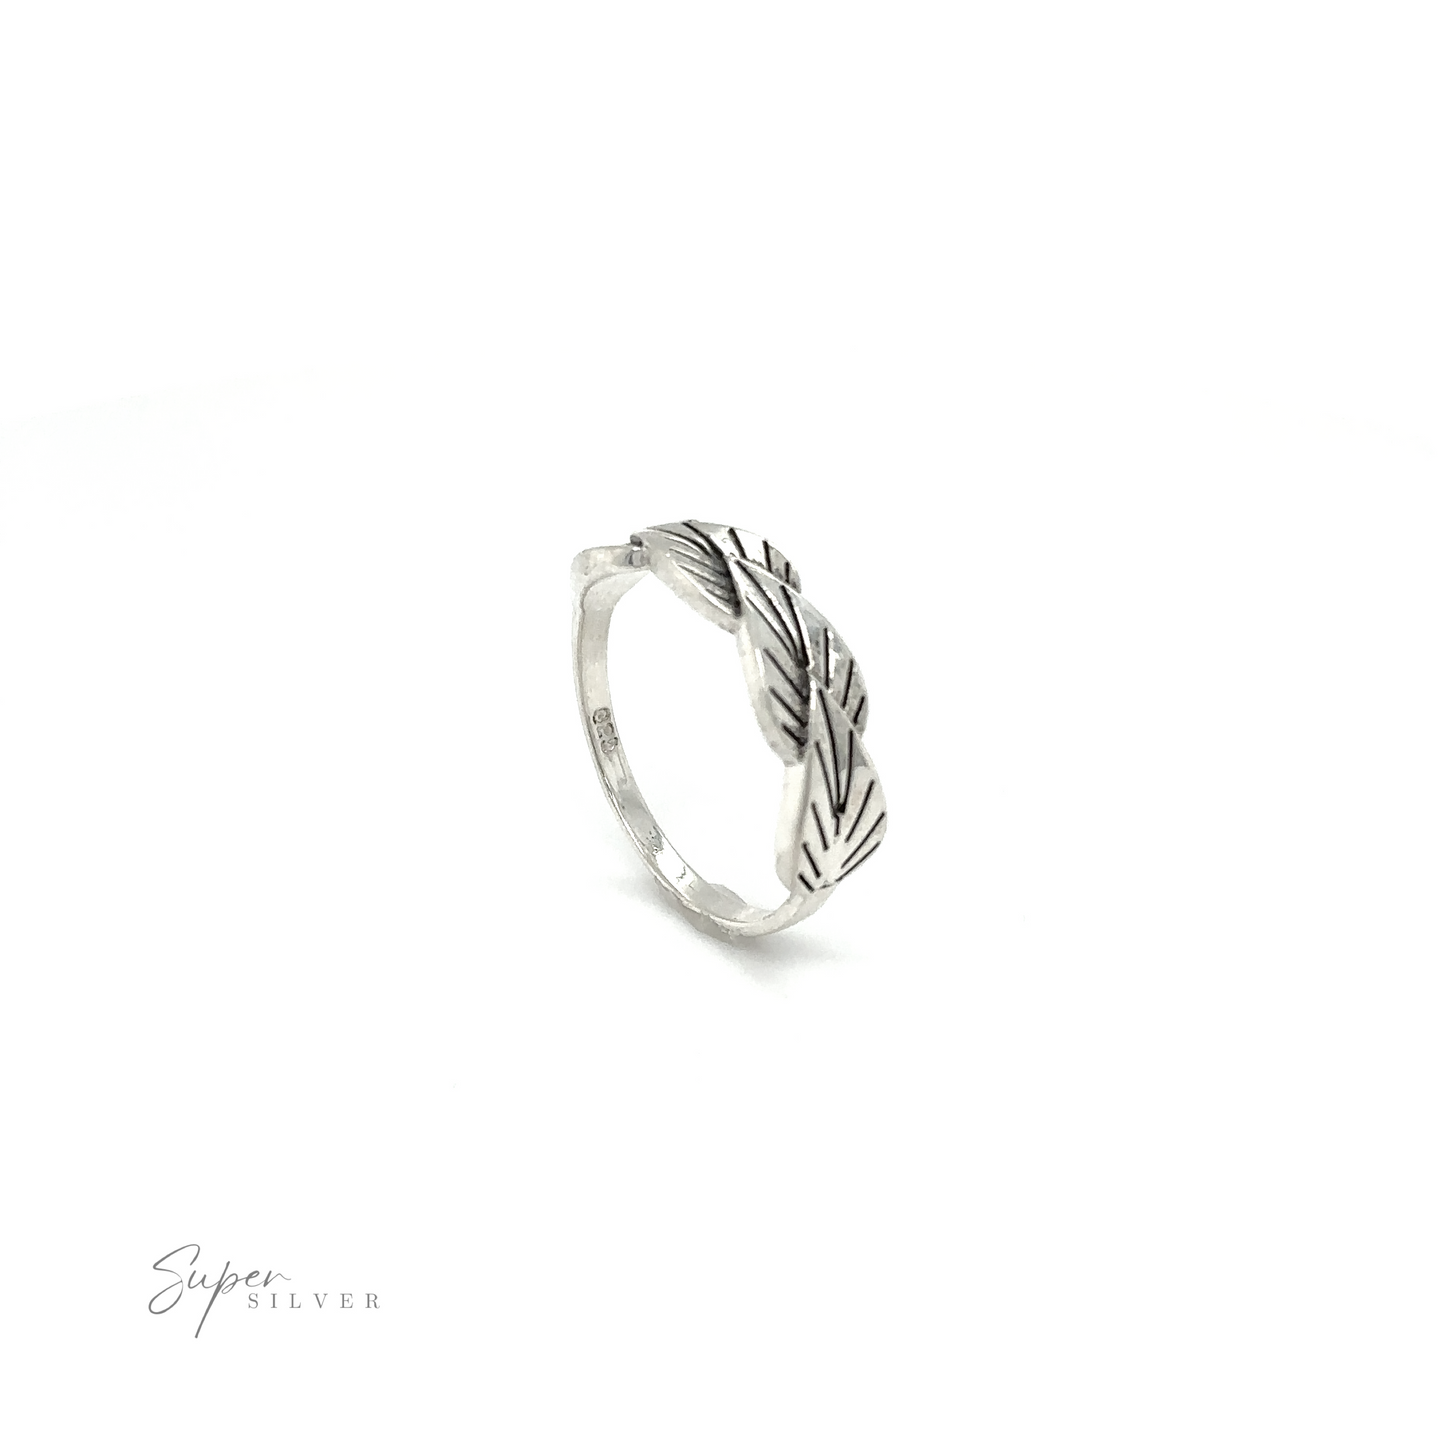 A stunning Super Silver Leaves Ring adorned with a graceful leaf design, perfect for nature enthusiasts seeking an elegant accessory.